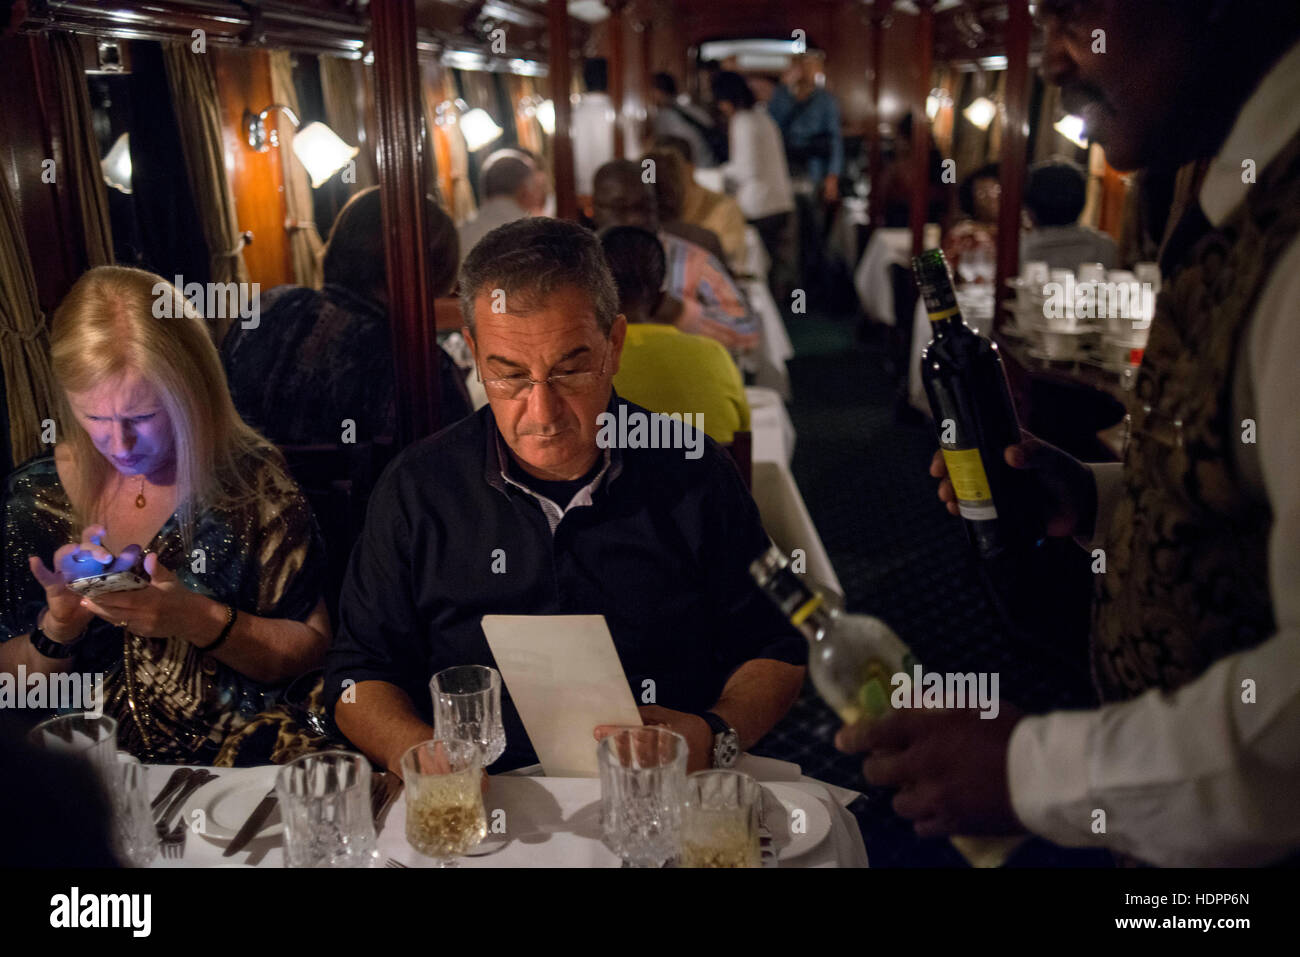 Inside the restaurant railway carriage of Royal Livingstone Express luxury train. The ambiance of the dining carriage offers more than warm elegance. Stock Photo